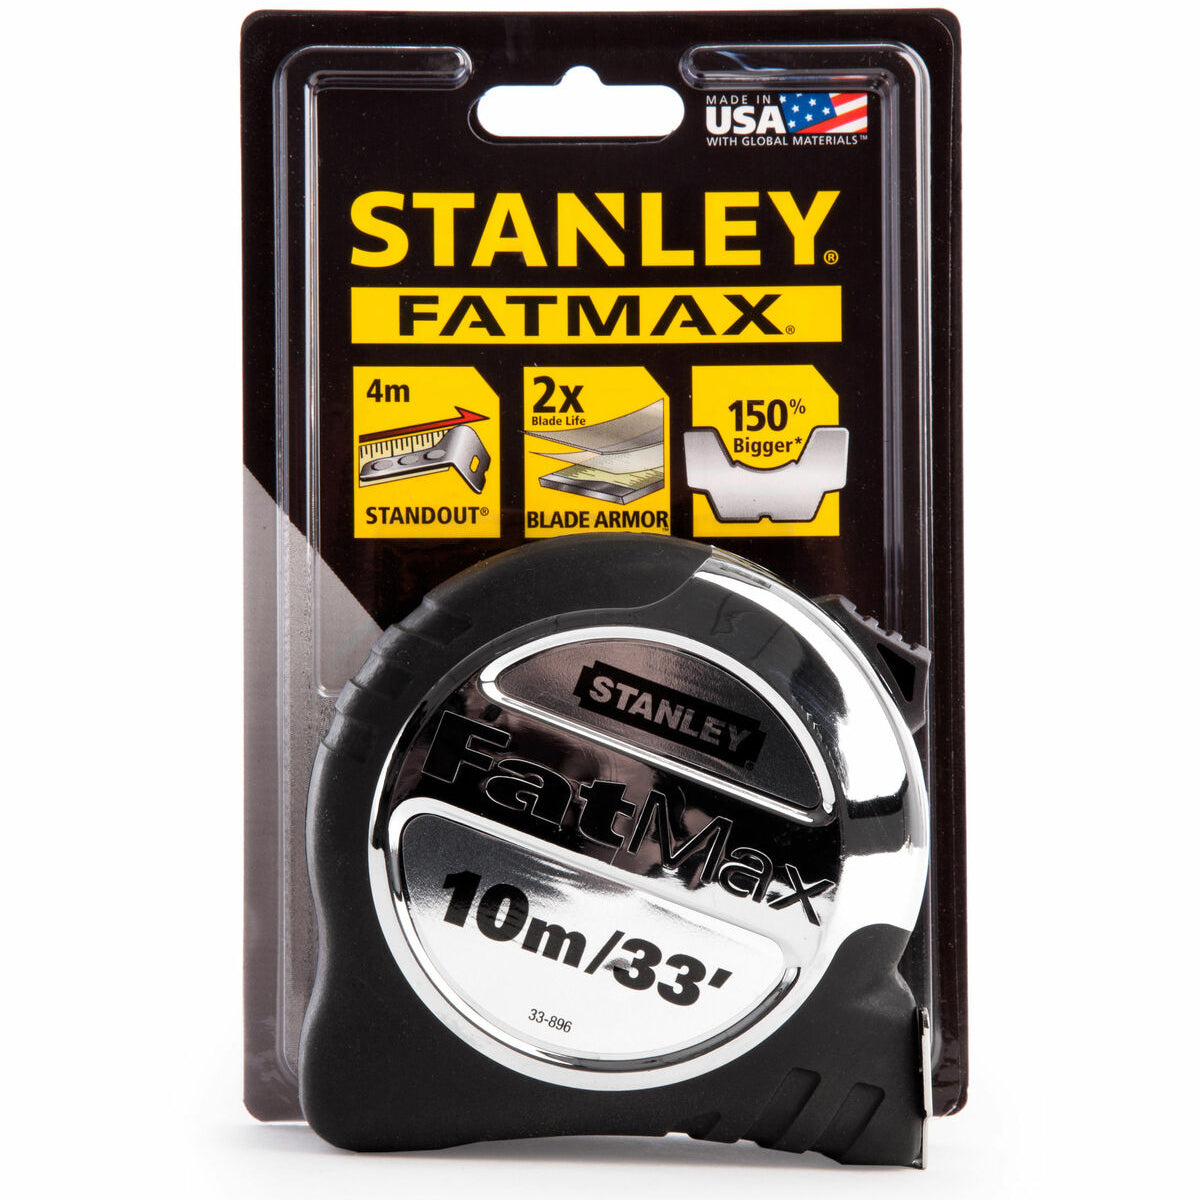 Stanley 5-33-896 FatMax Xtreme Pocket Tape Measure 10m/33ft STA533896